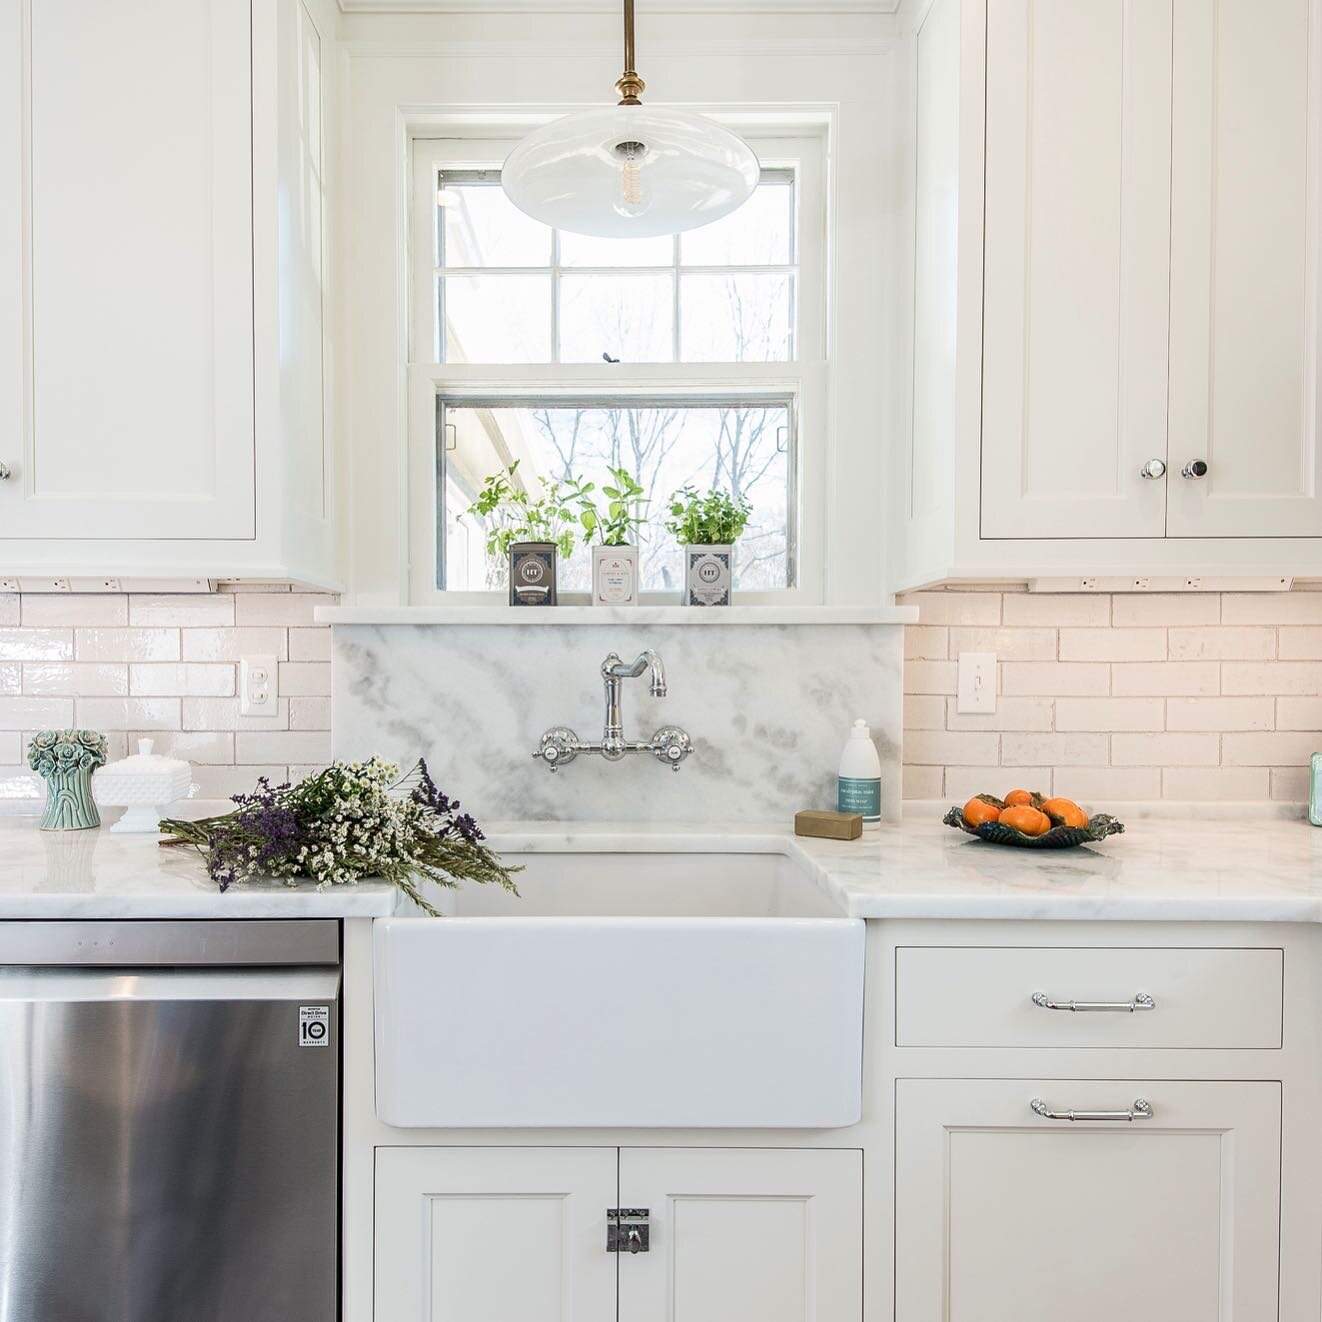 Dressed in winter WHITE! 
Loved working on this historic home leaning into vintage style items like this faucet, brick backsplash, countertops &amp; lighting. 
#covenantkitchens 
Photo 📸@briandavidbecker